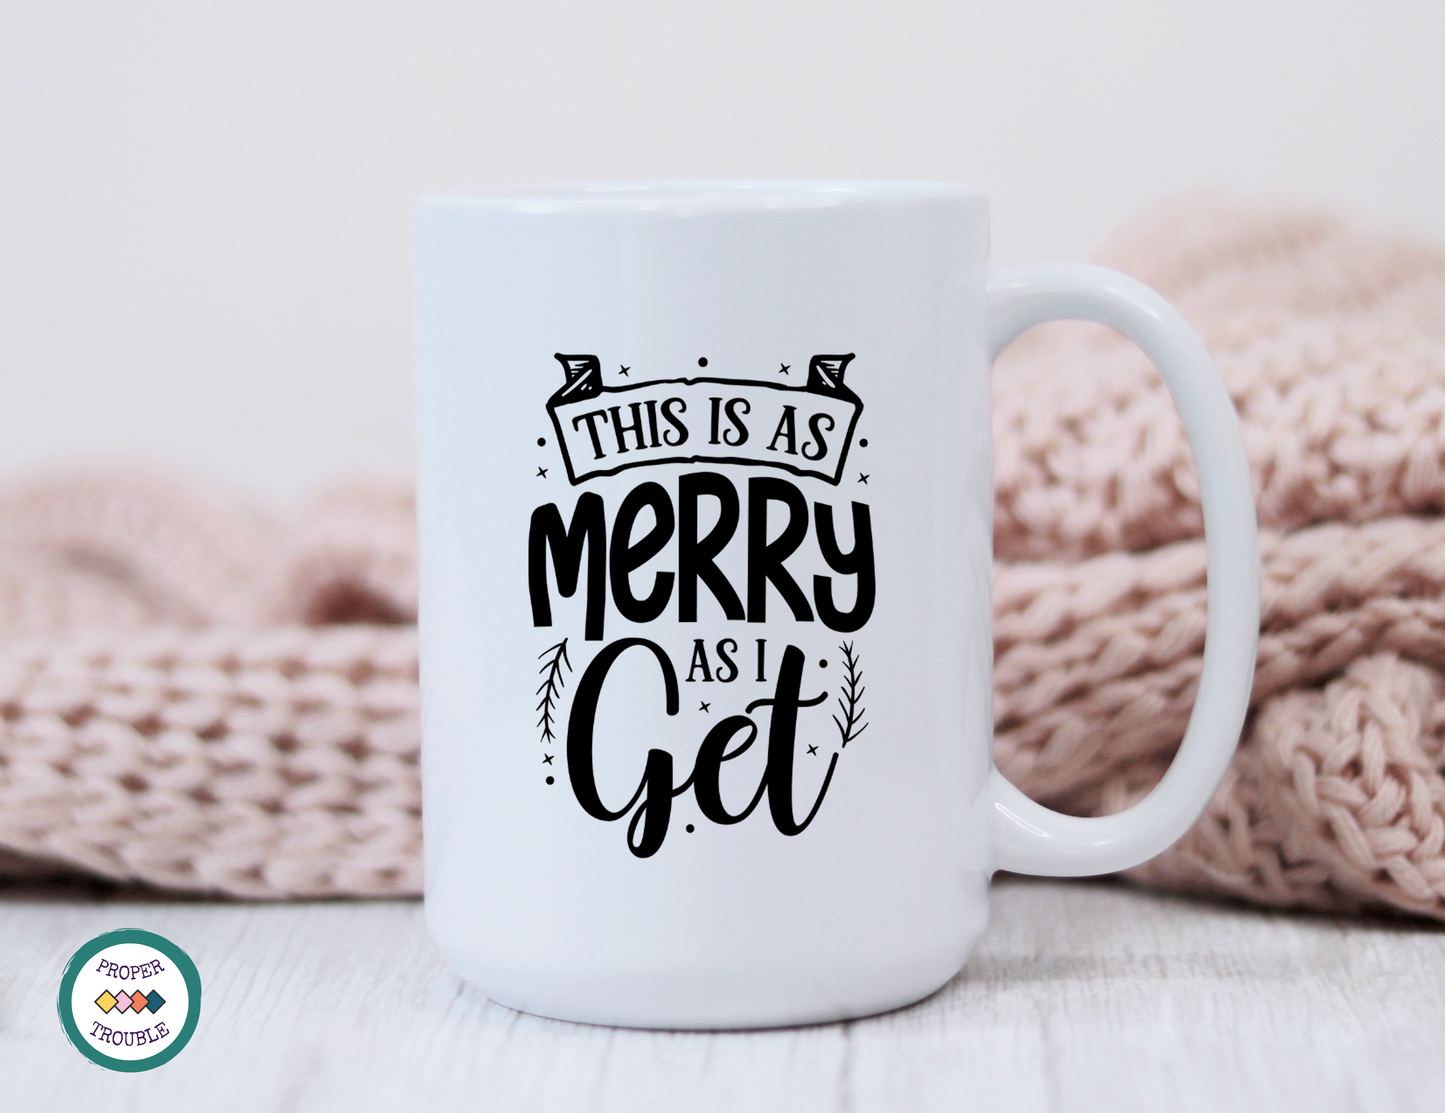 Zen Christmas: The Gift of Nothingness/ This Is As Merry As I Get Coffee / Tea Mug